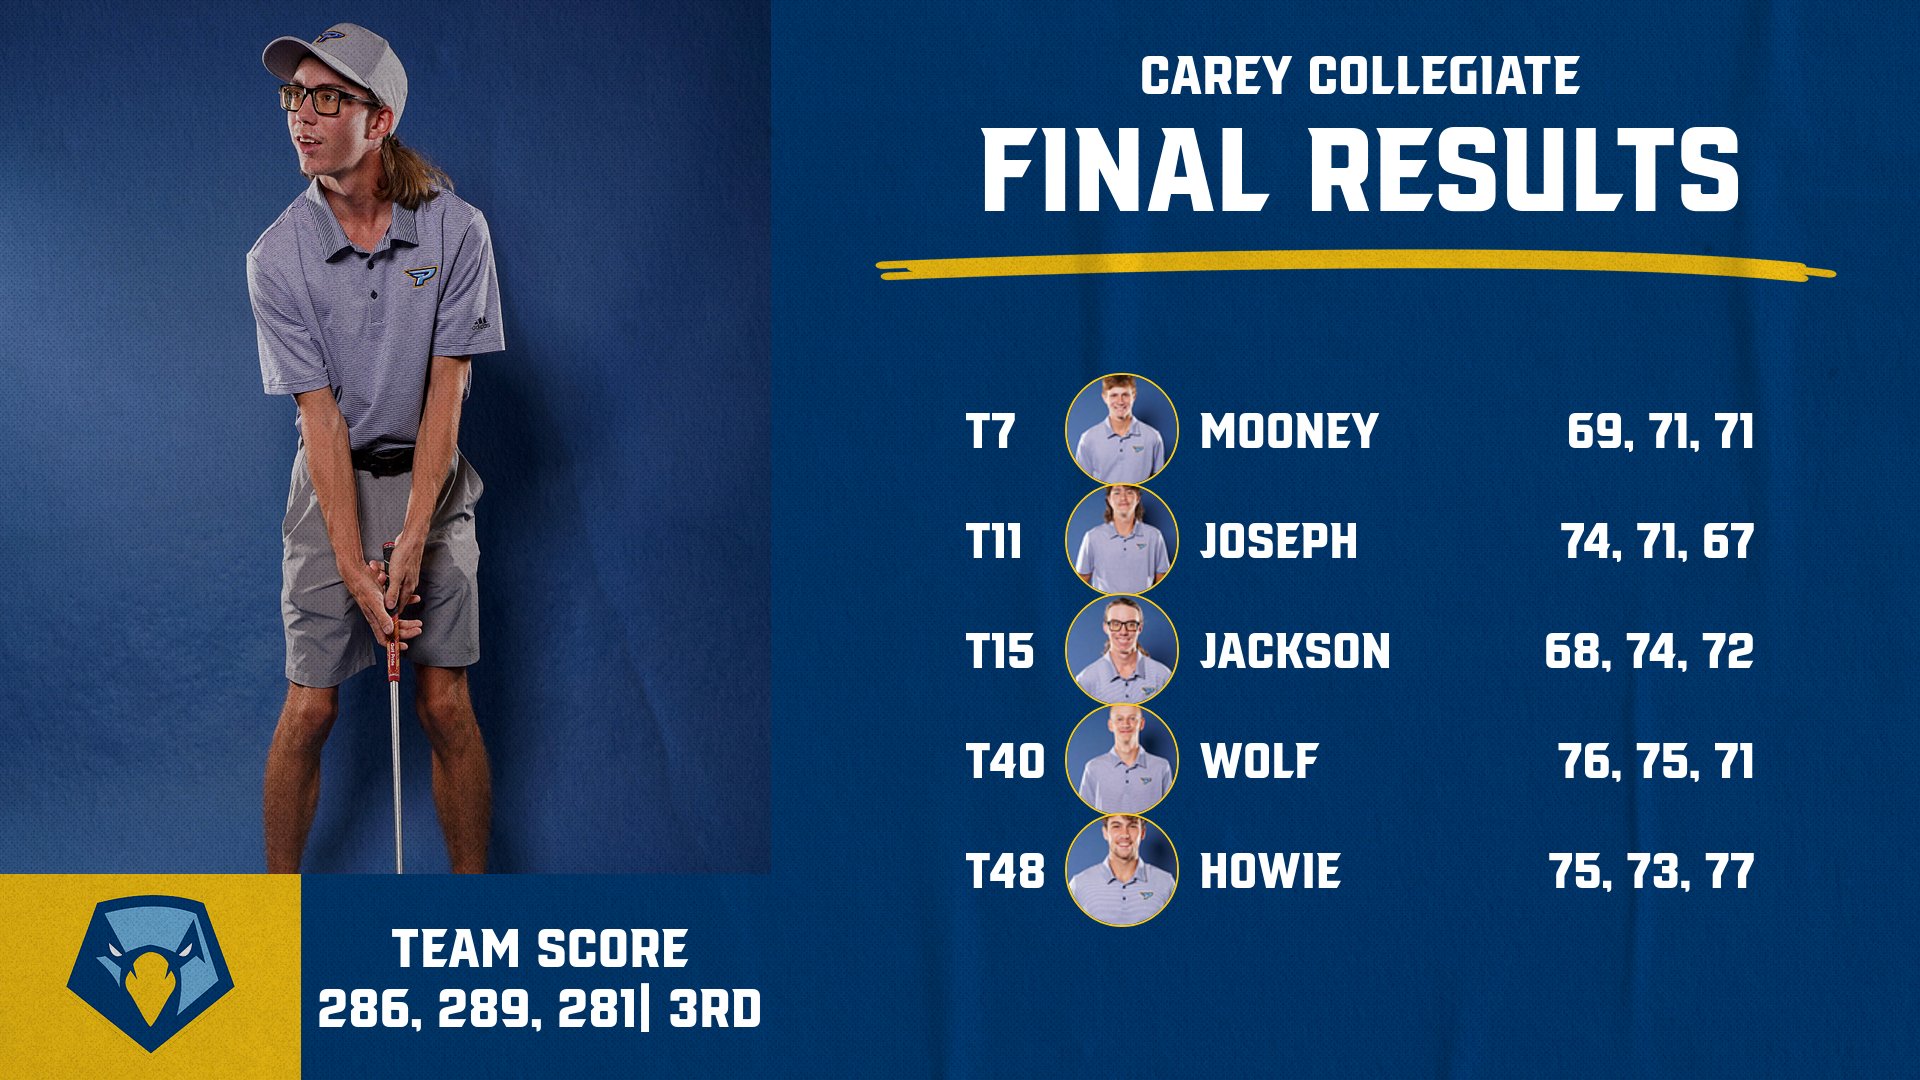 Men’s Golf powers through for a Third-Place finish at the Carey Collegiate